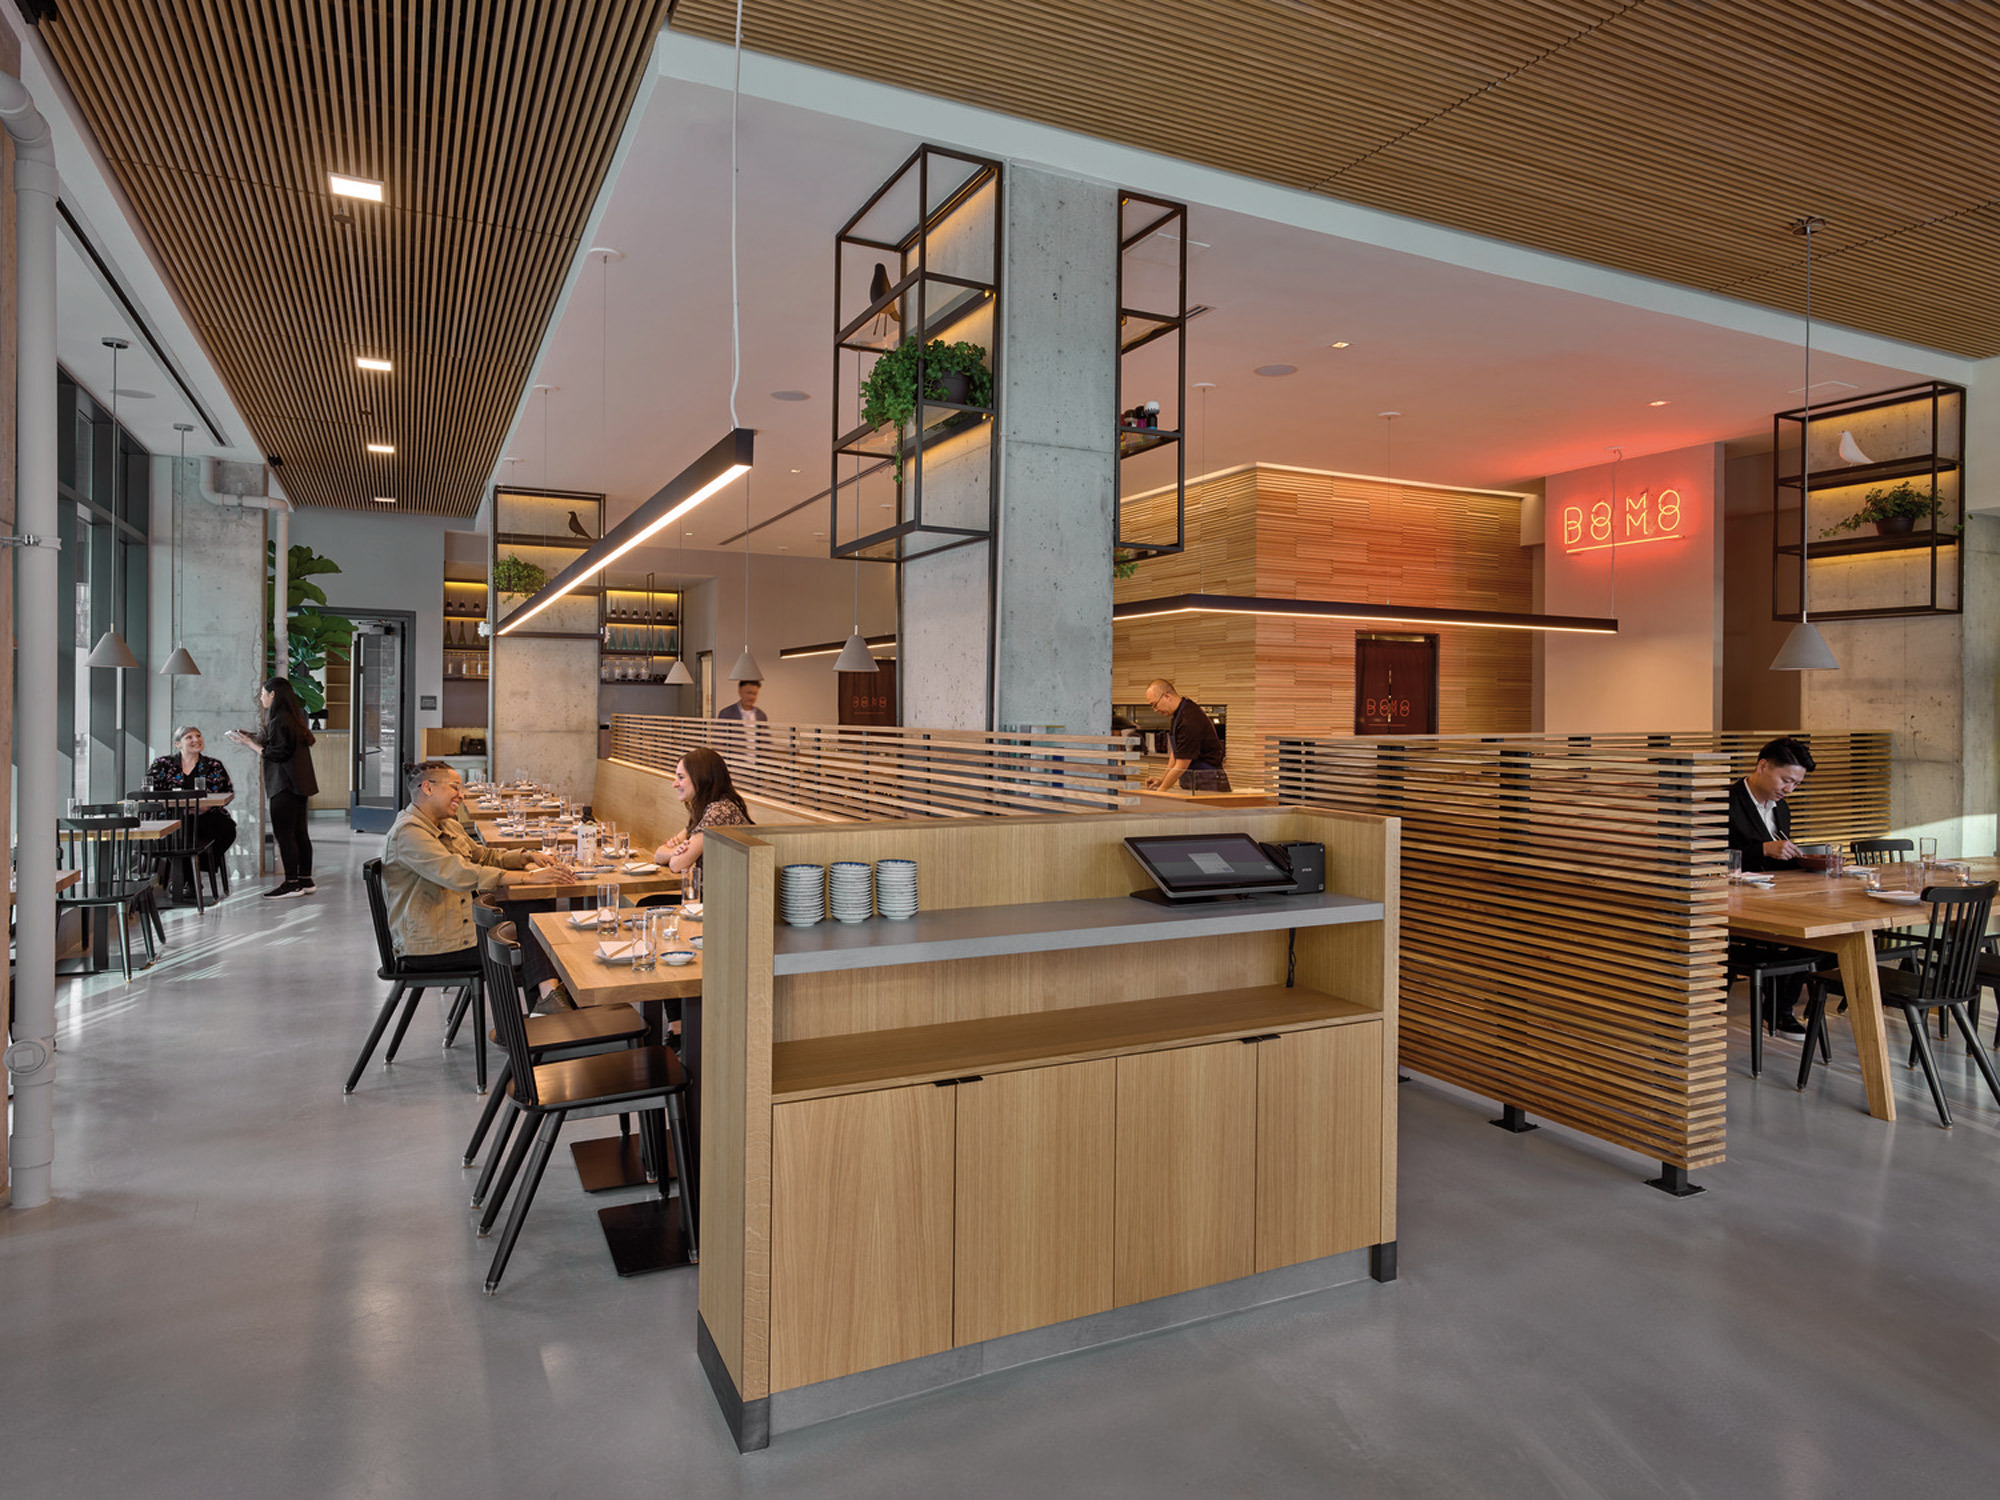 Modern restaurant interior featuring sleek wood paneling, pendant lighting, and exposed concrete columns with greenery. Balanced natural and artificial light complement the warm tones and linear design elements, creating an inviting, contemporary dining atmosphere.